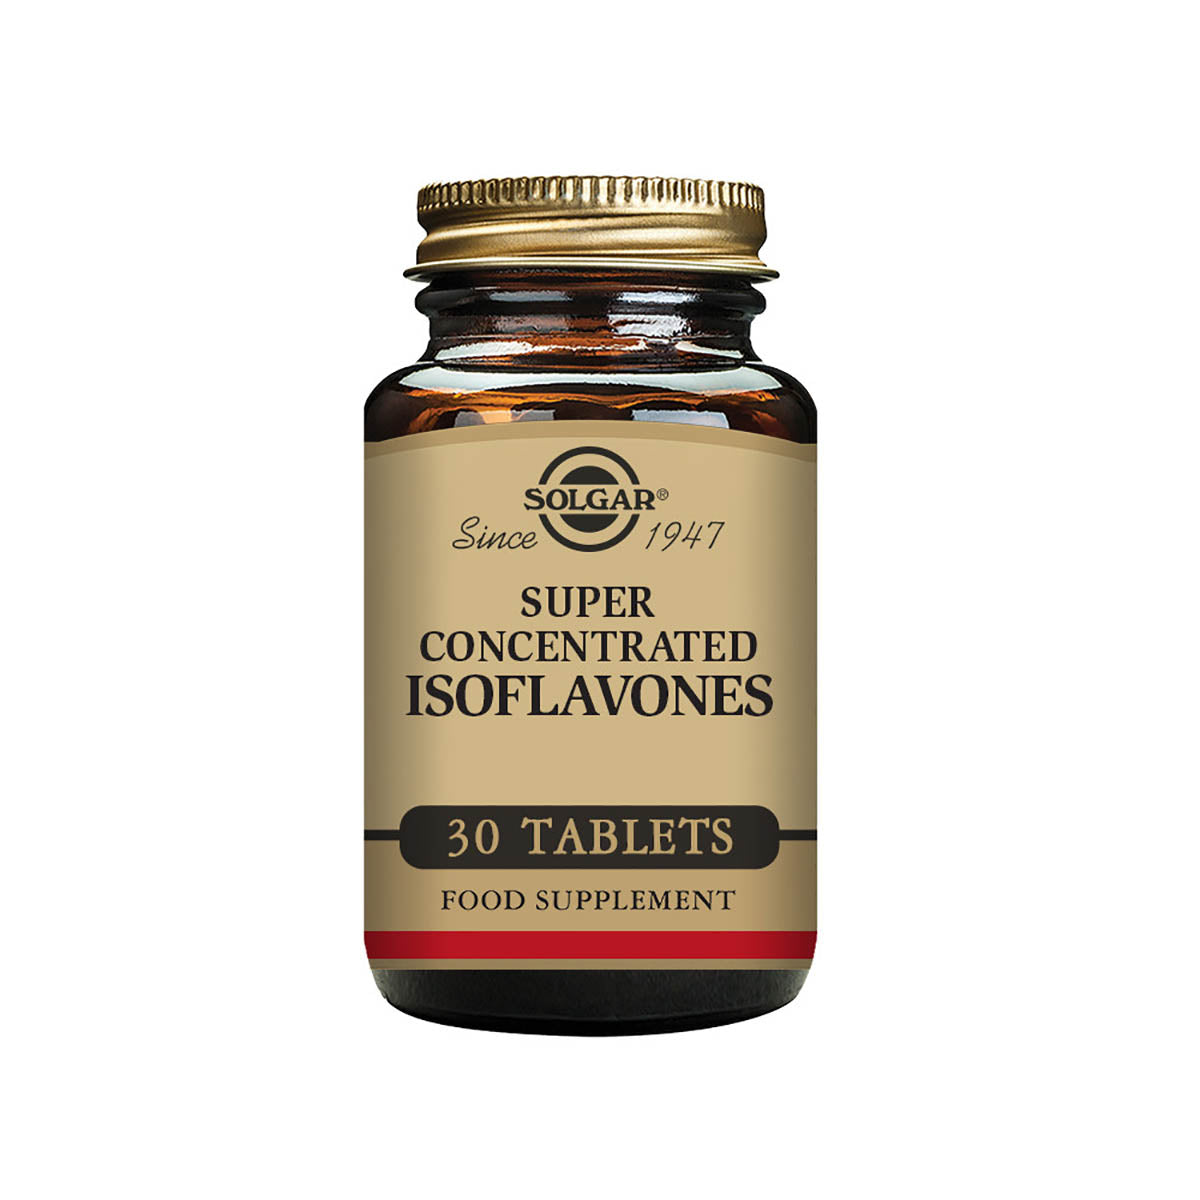 Solgar® Super Concentrated Isoflavones Tablets - Pack of 30